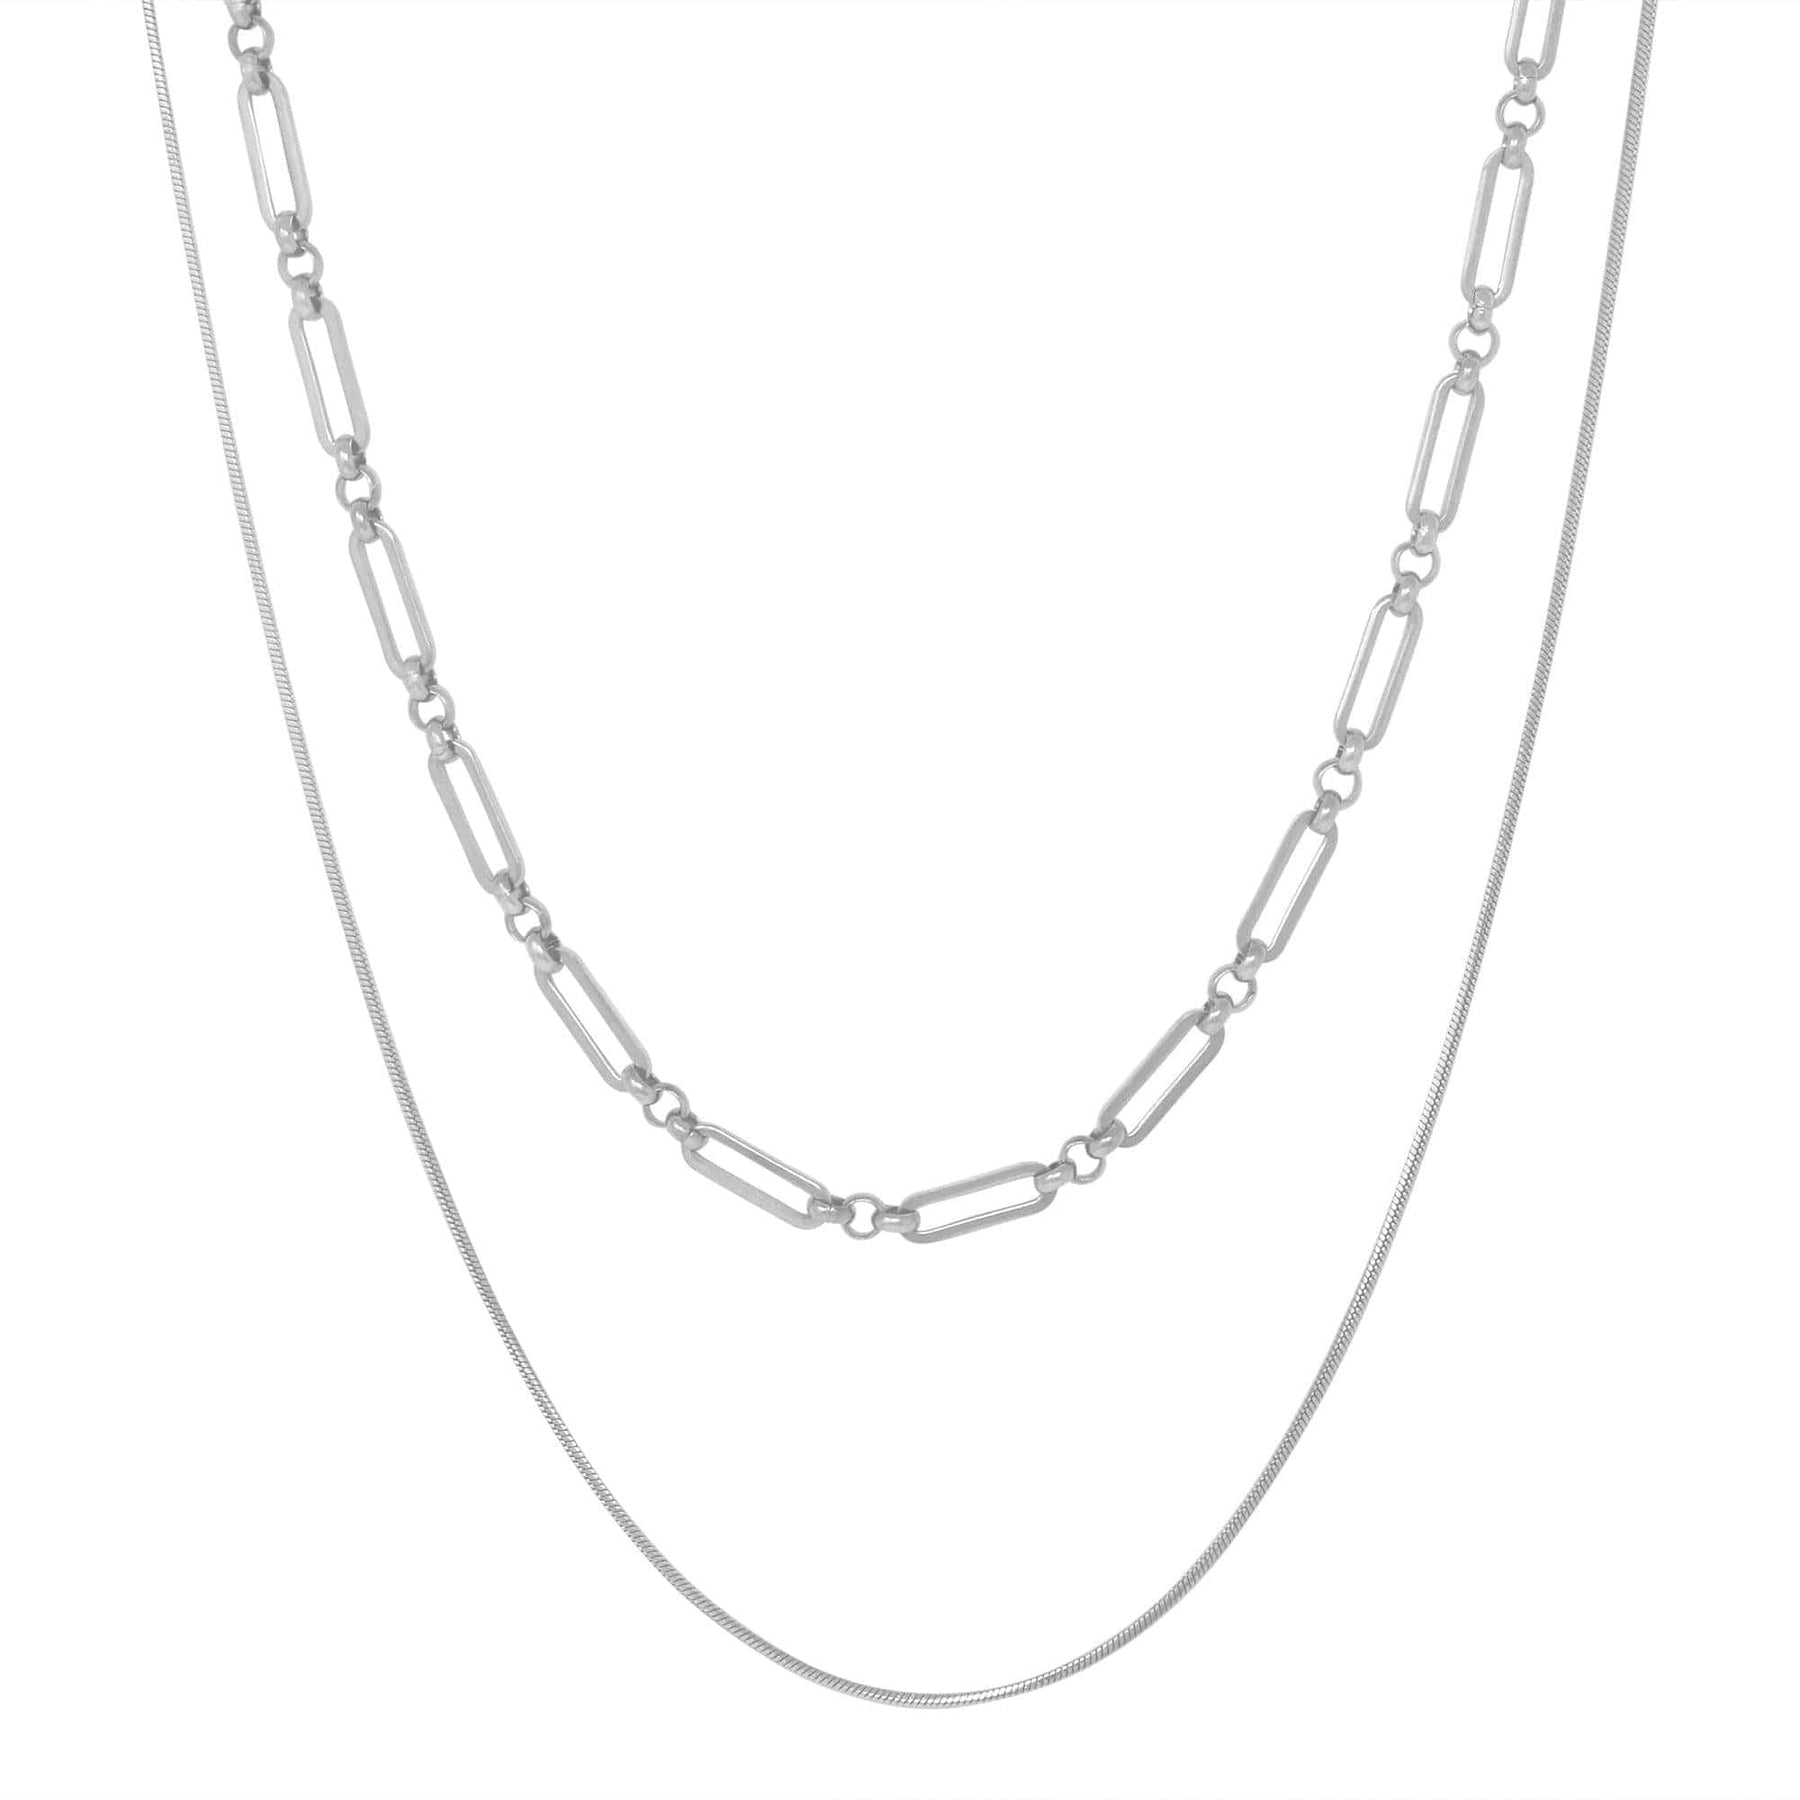 BohoMoon Stainless Steel Ashanti Layered Necklace Silver